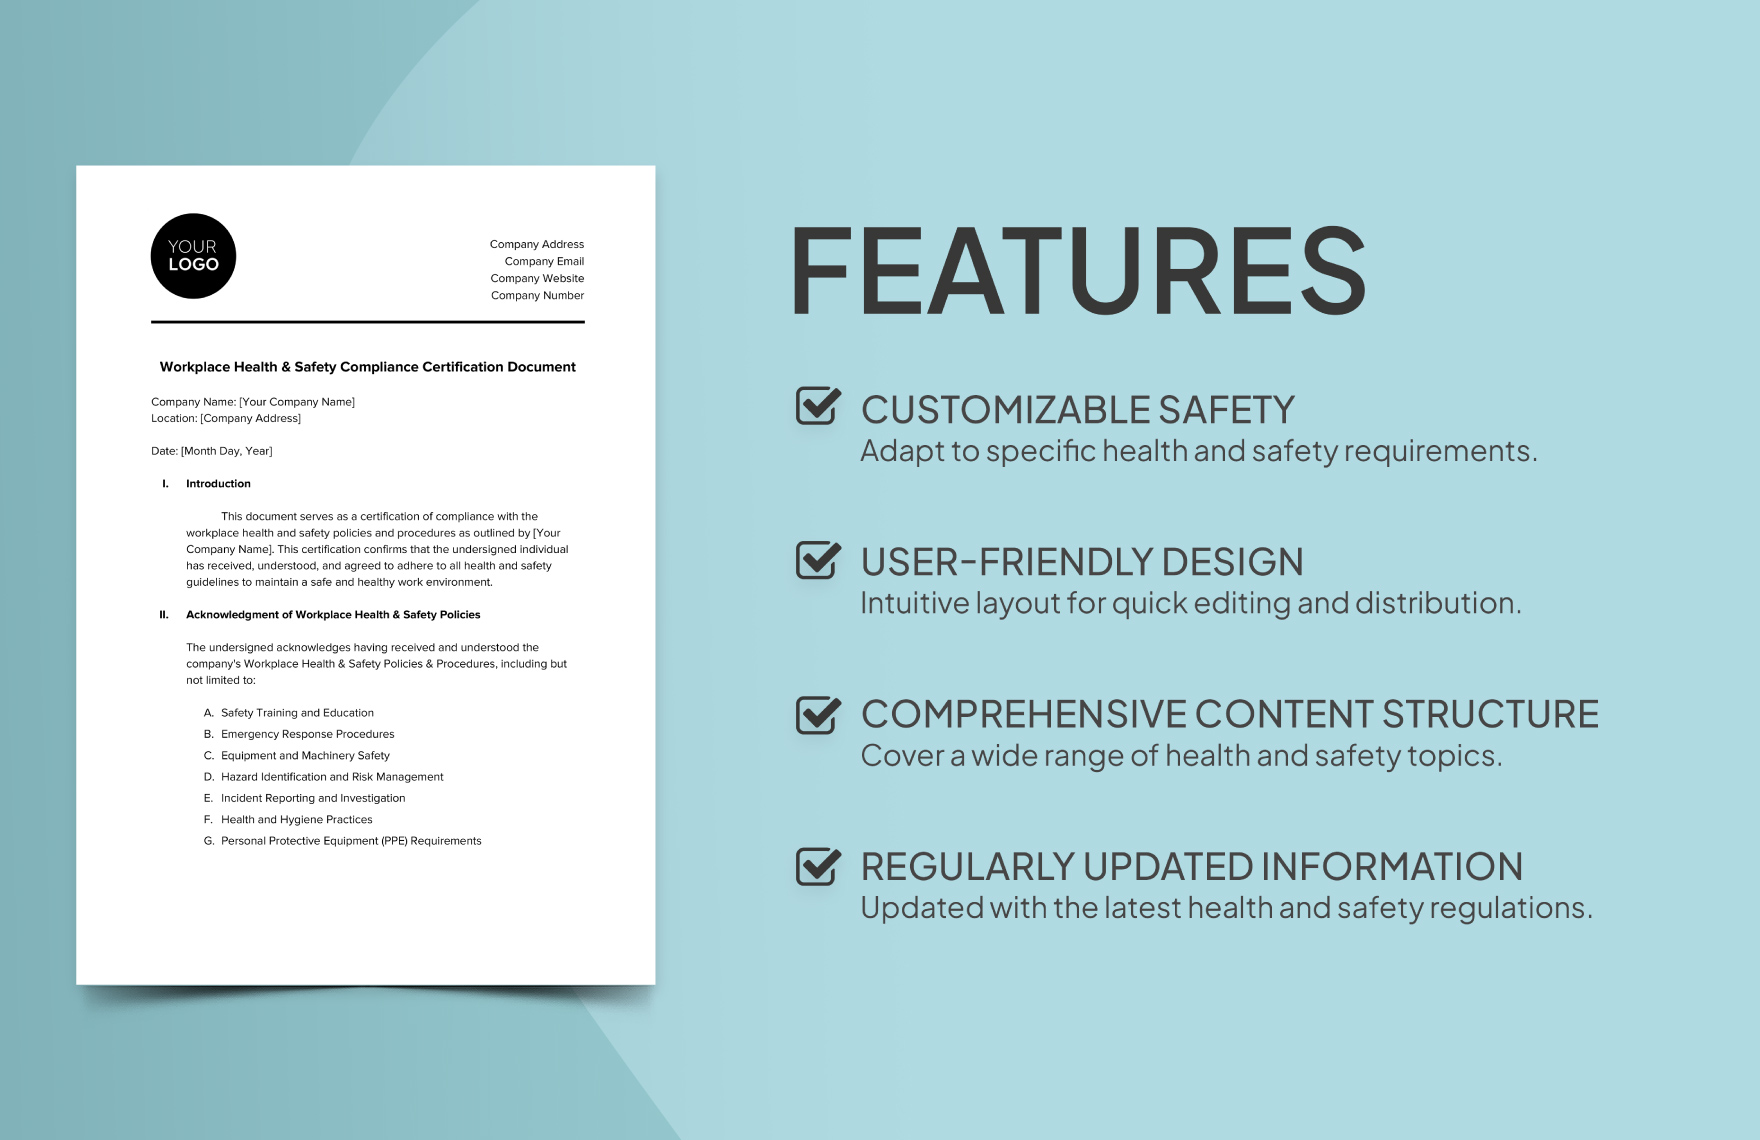 Workplace Health & Safety Compliance Certification Document Template